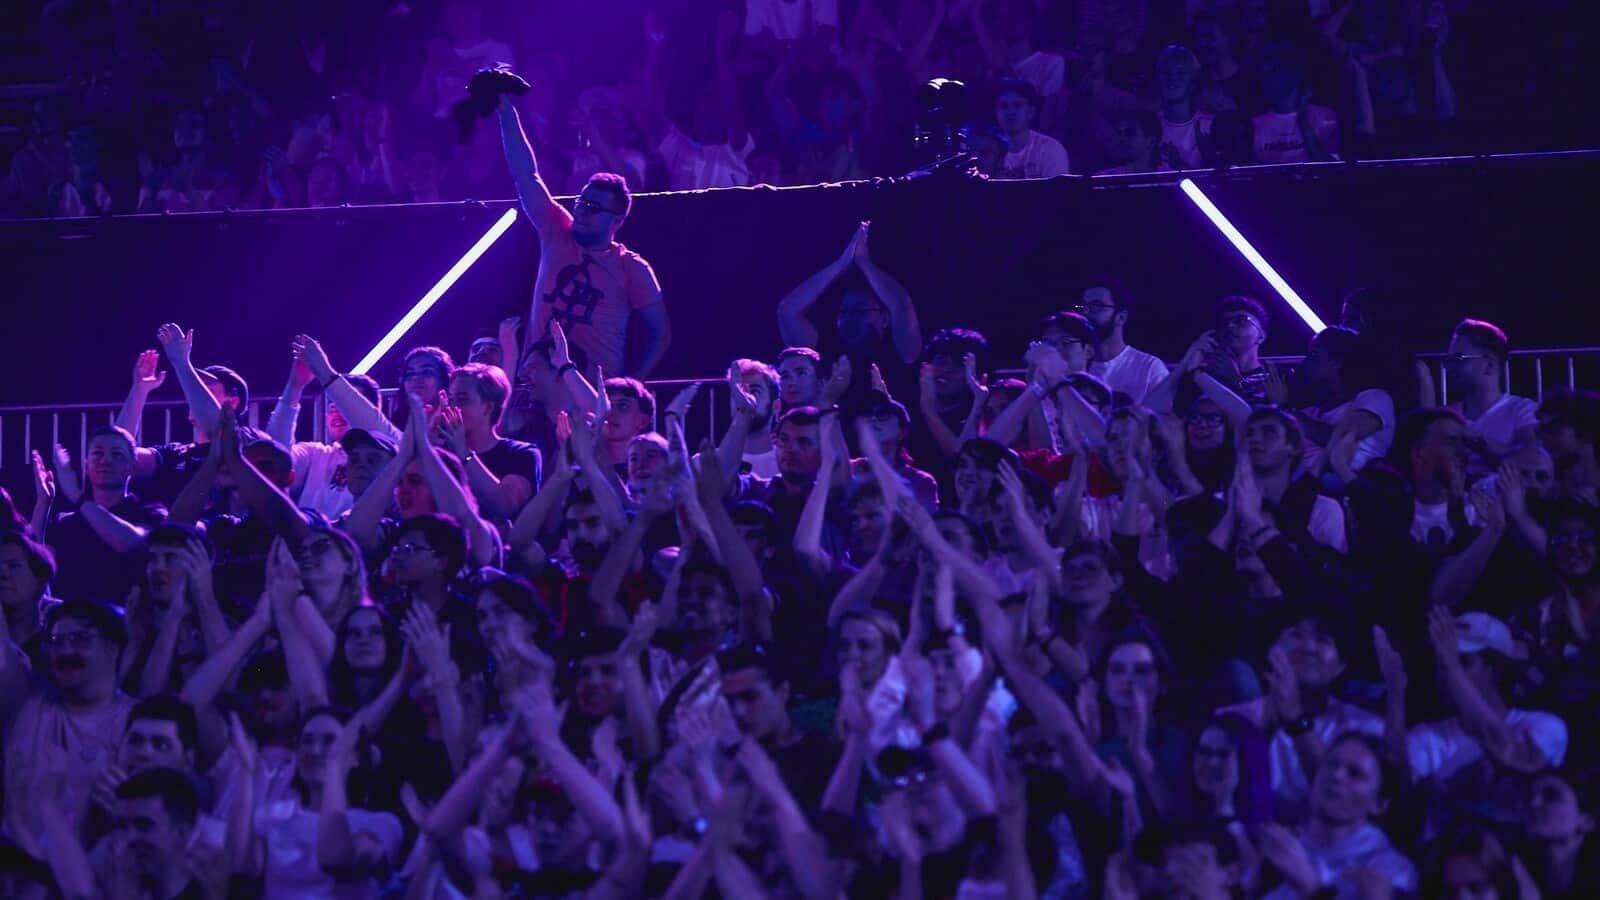 The crowd bathed in purple light at Valorant Masters